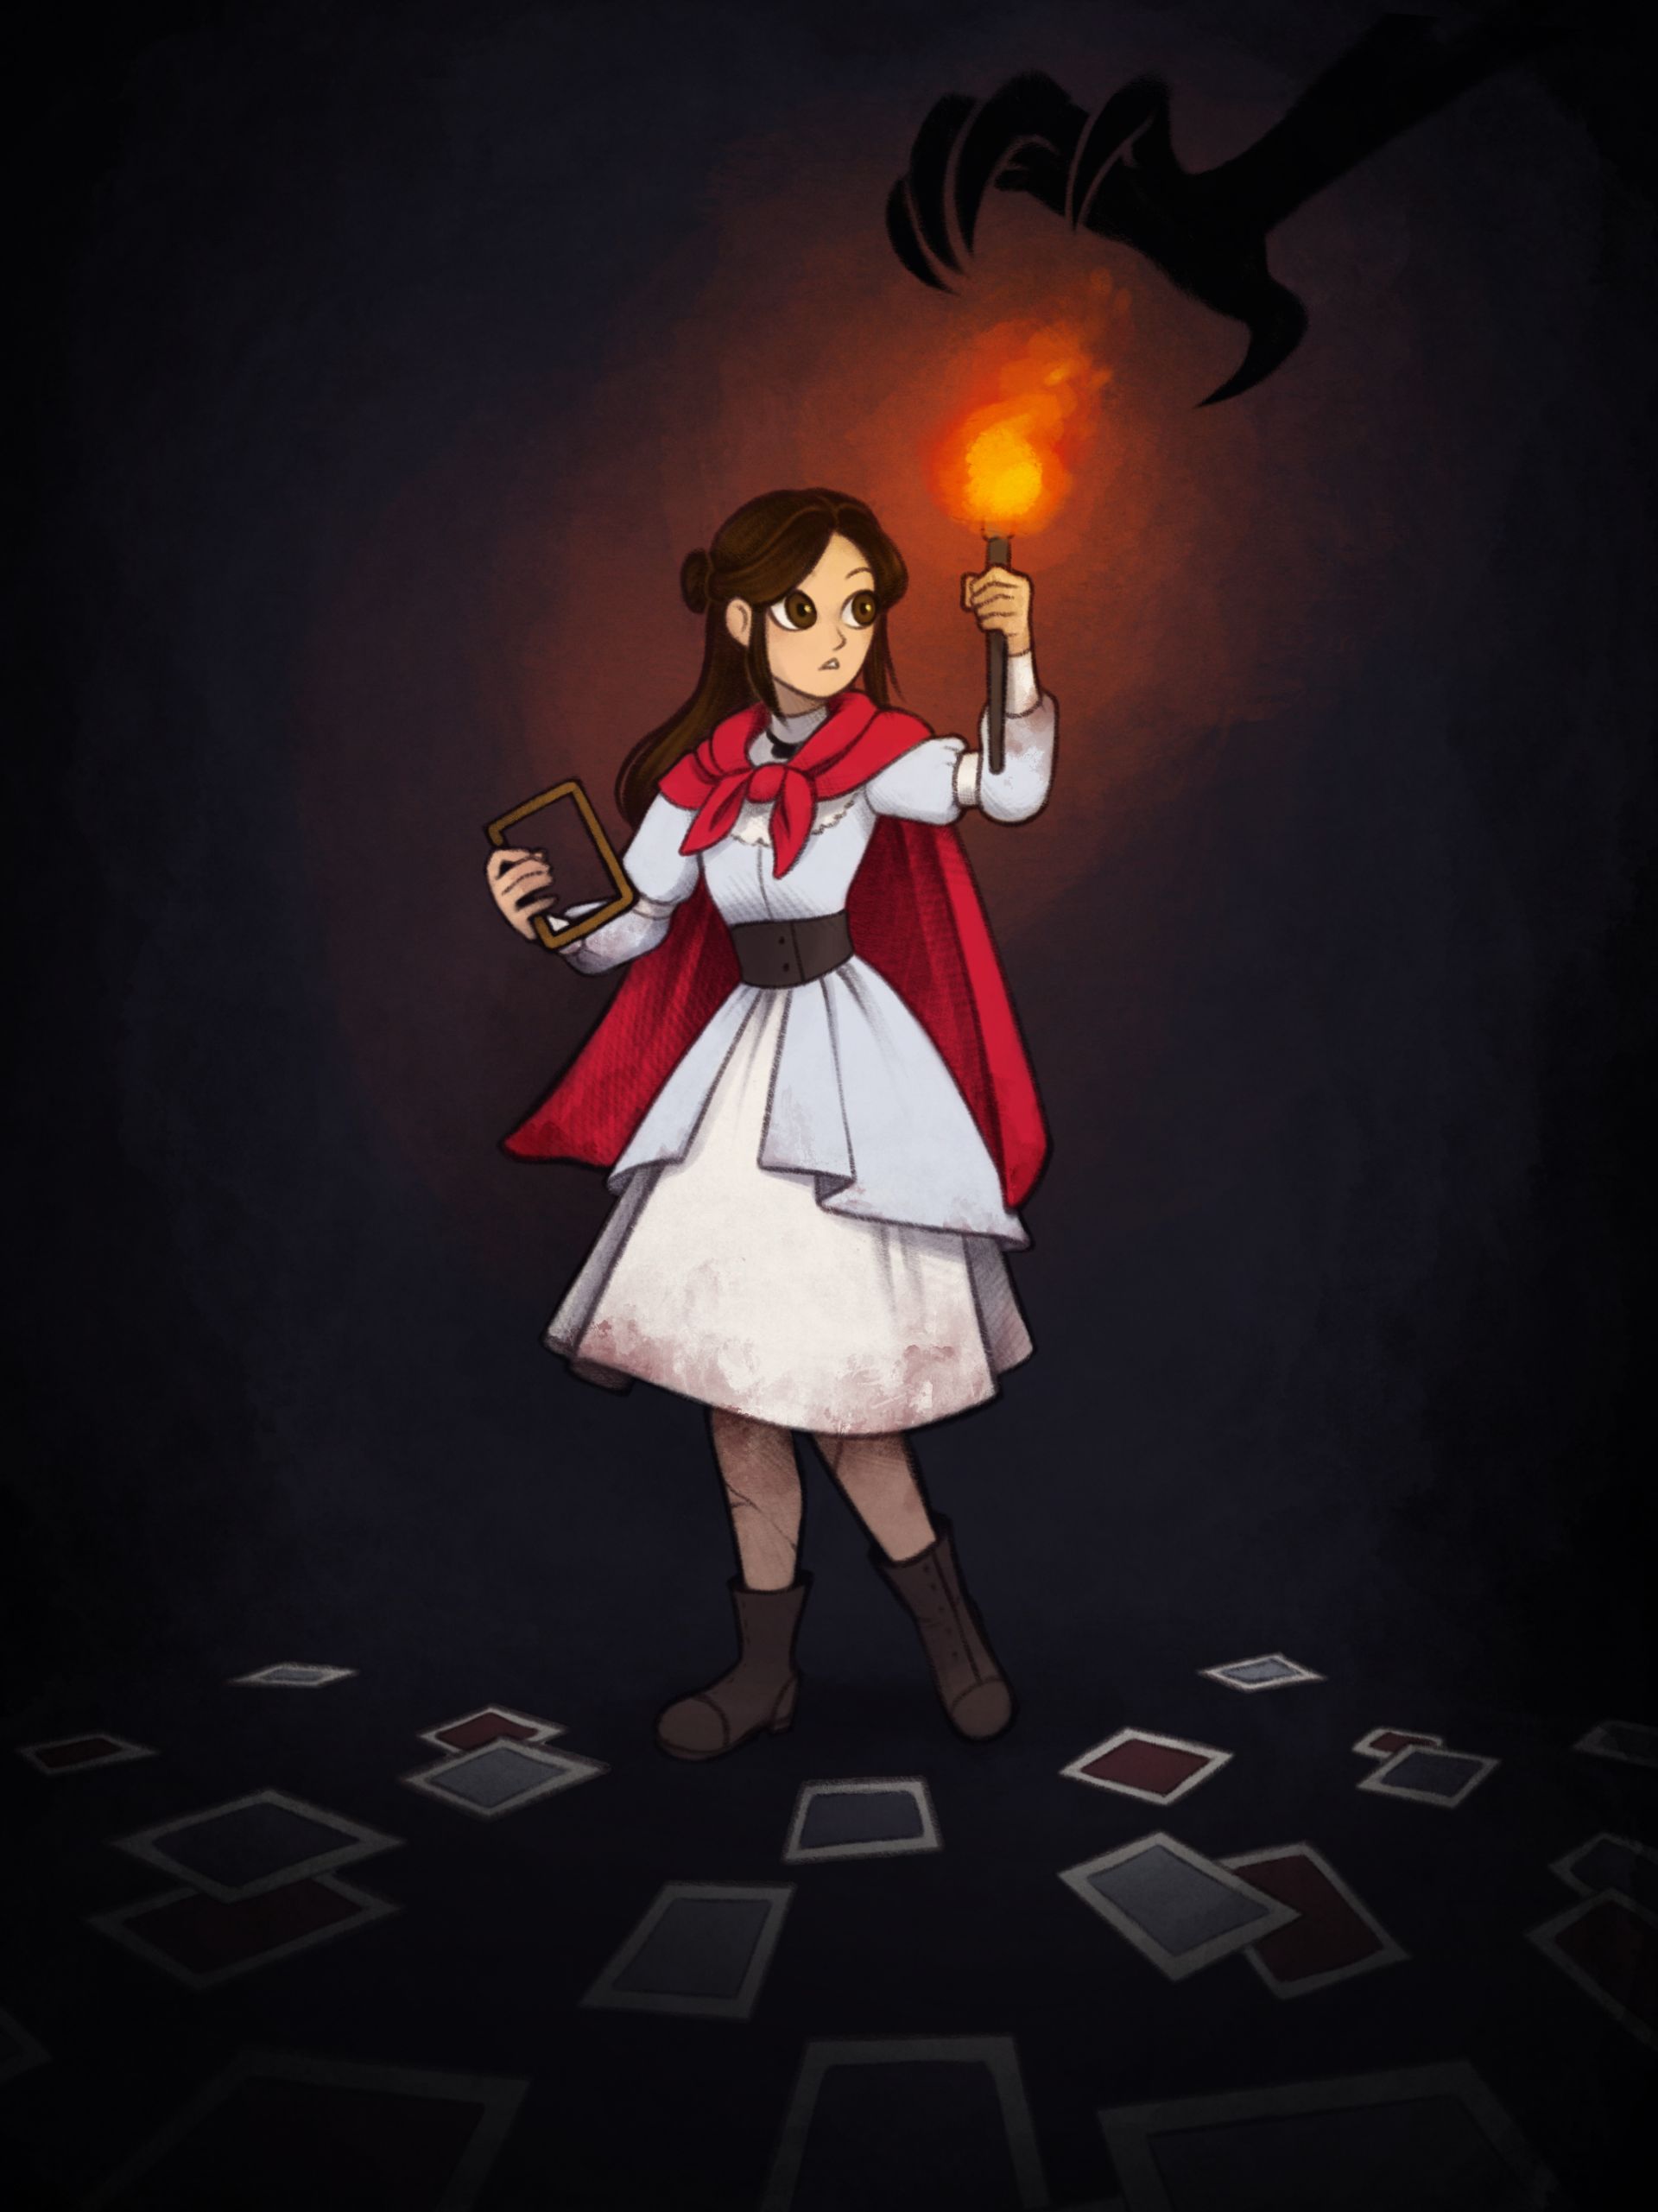 Cartoon image of a young woman holding a torch and wearing a white dress and red cape.